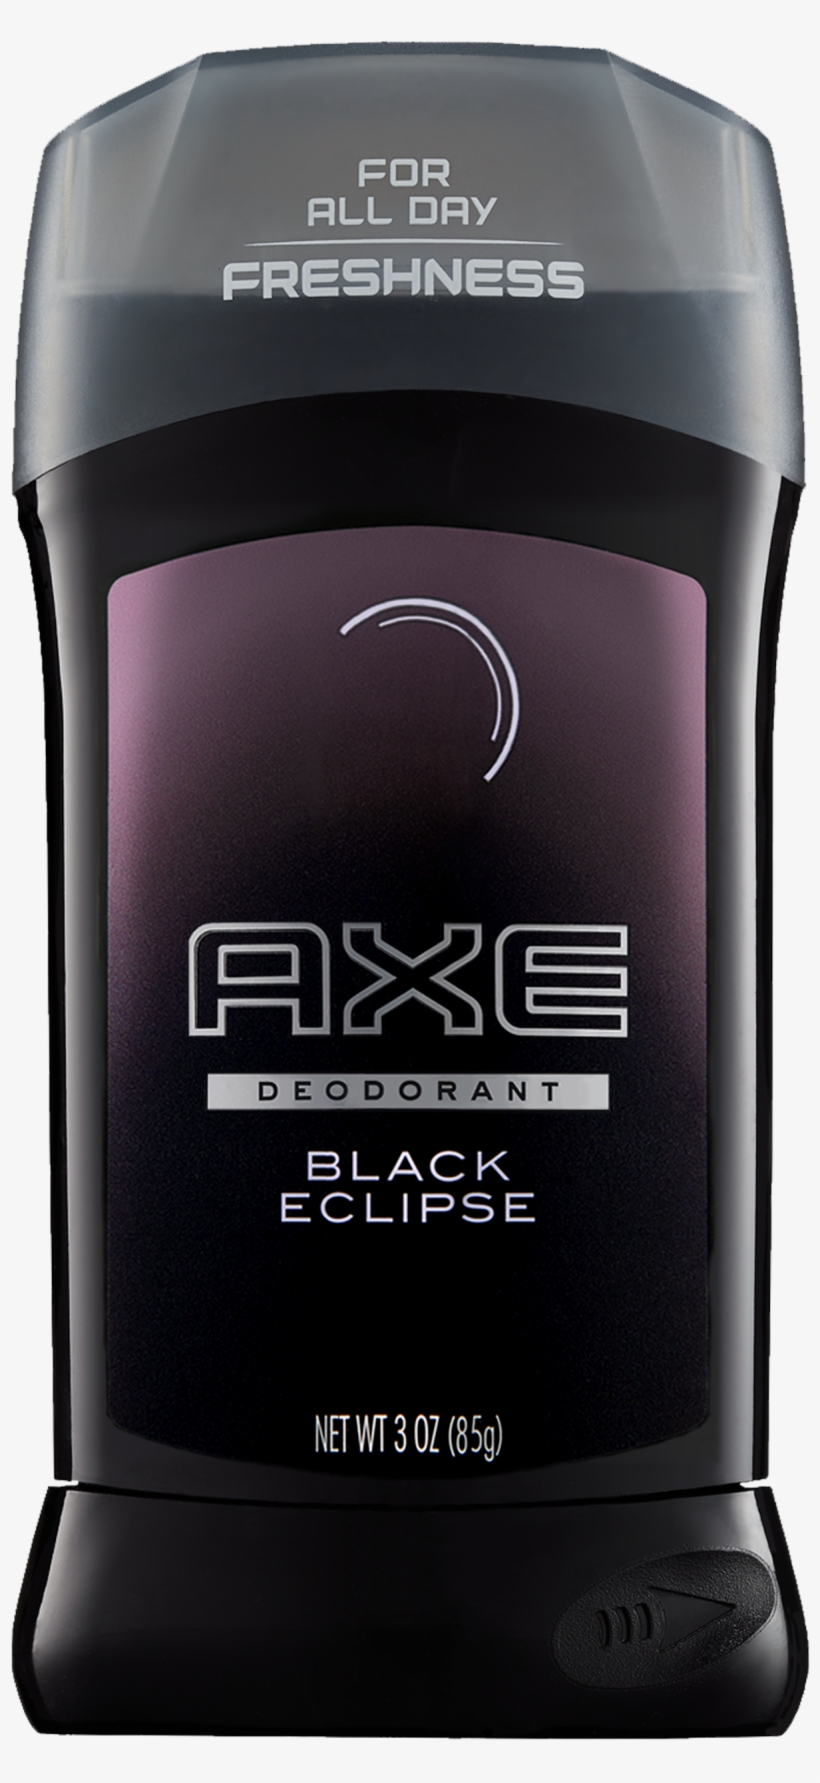 Appealing Hair Salon In African American Curly Hairstyles - Axe Black Eclipse Deodorant, transparent png #5753464